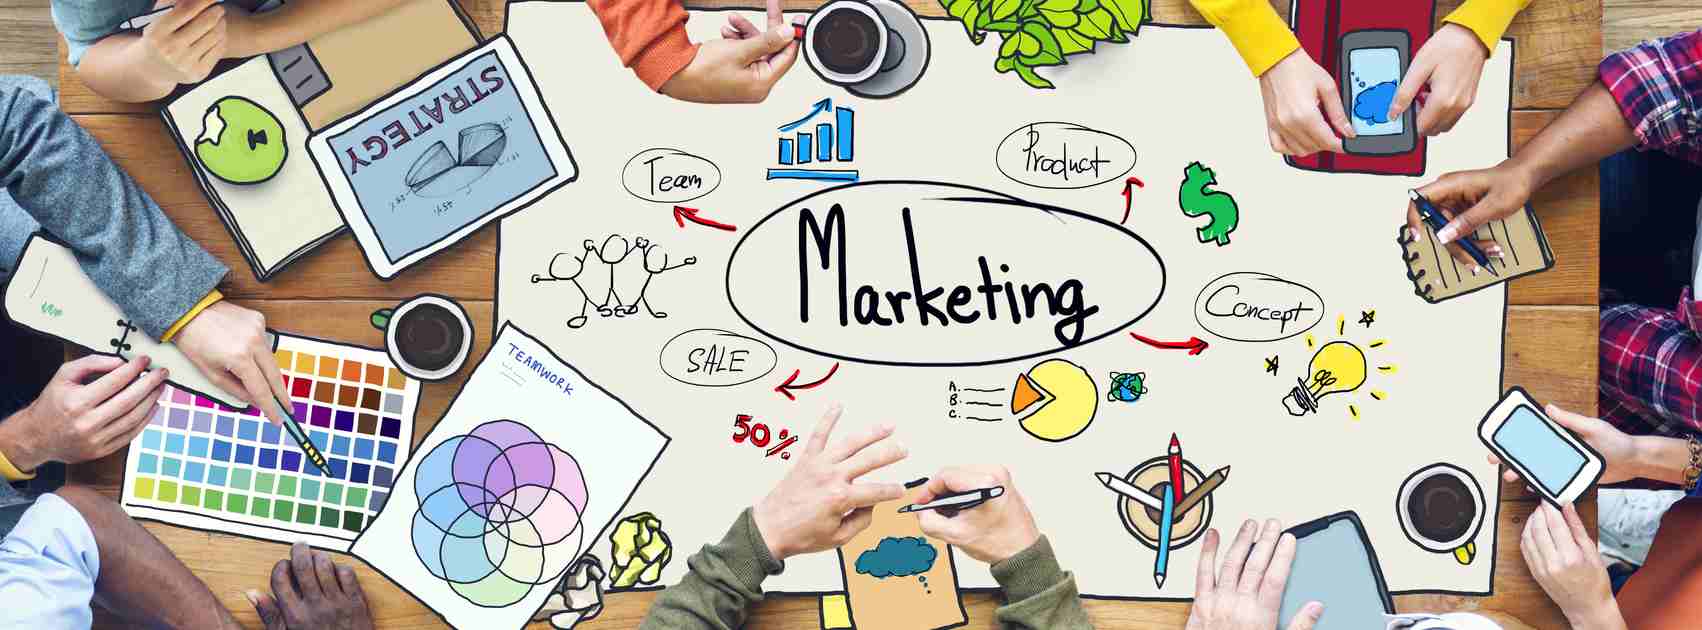 Marketing Ideas for Small Business (Beyond the Obvious)